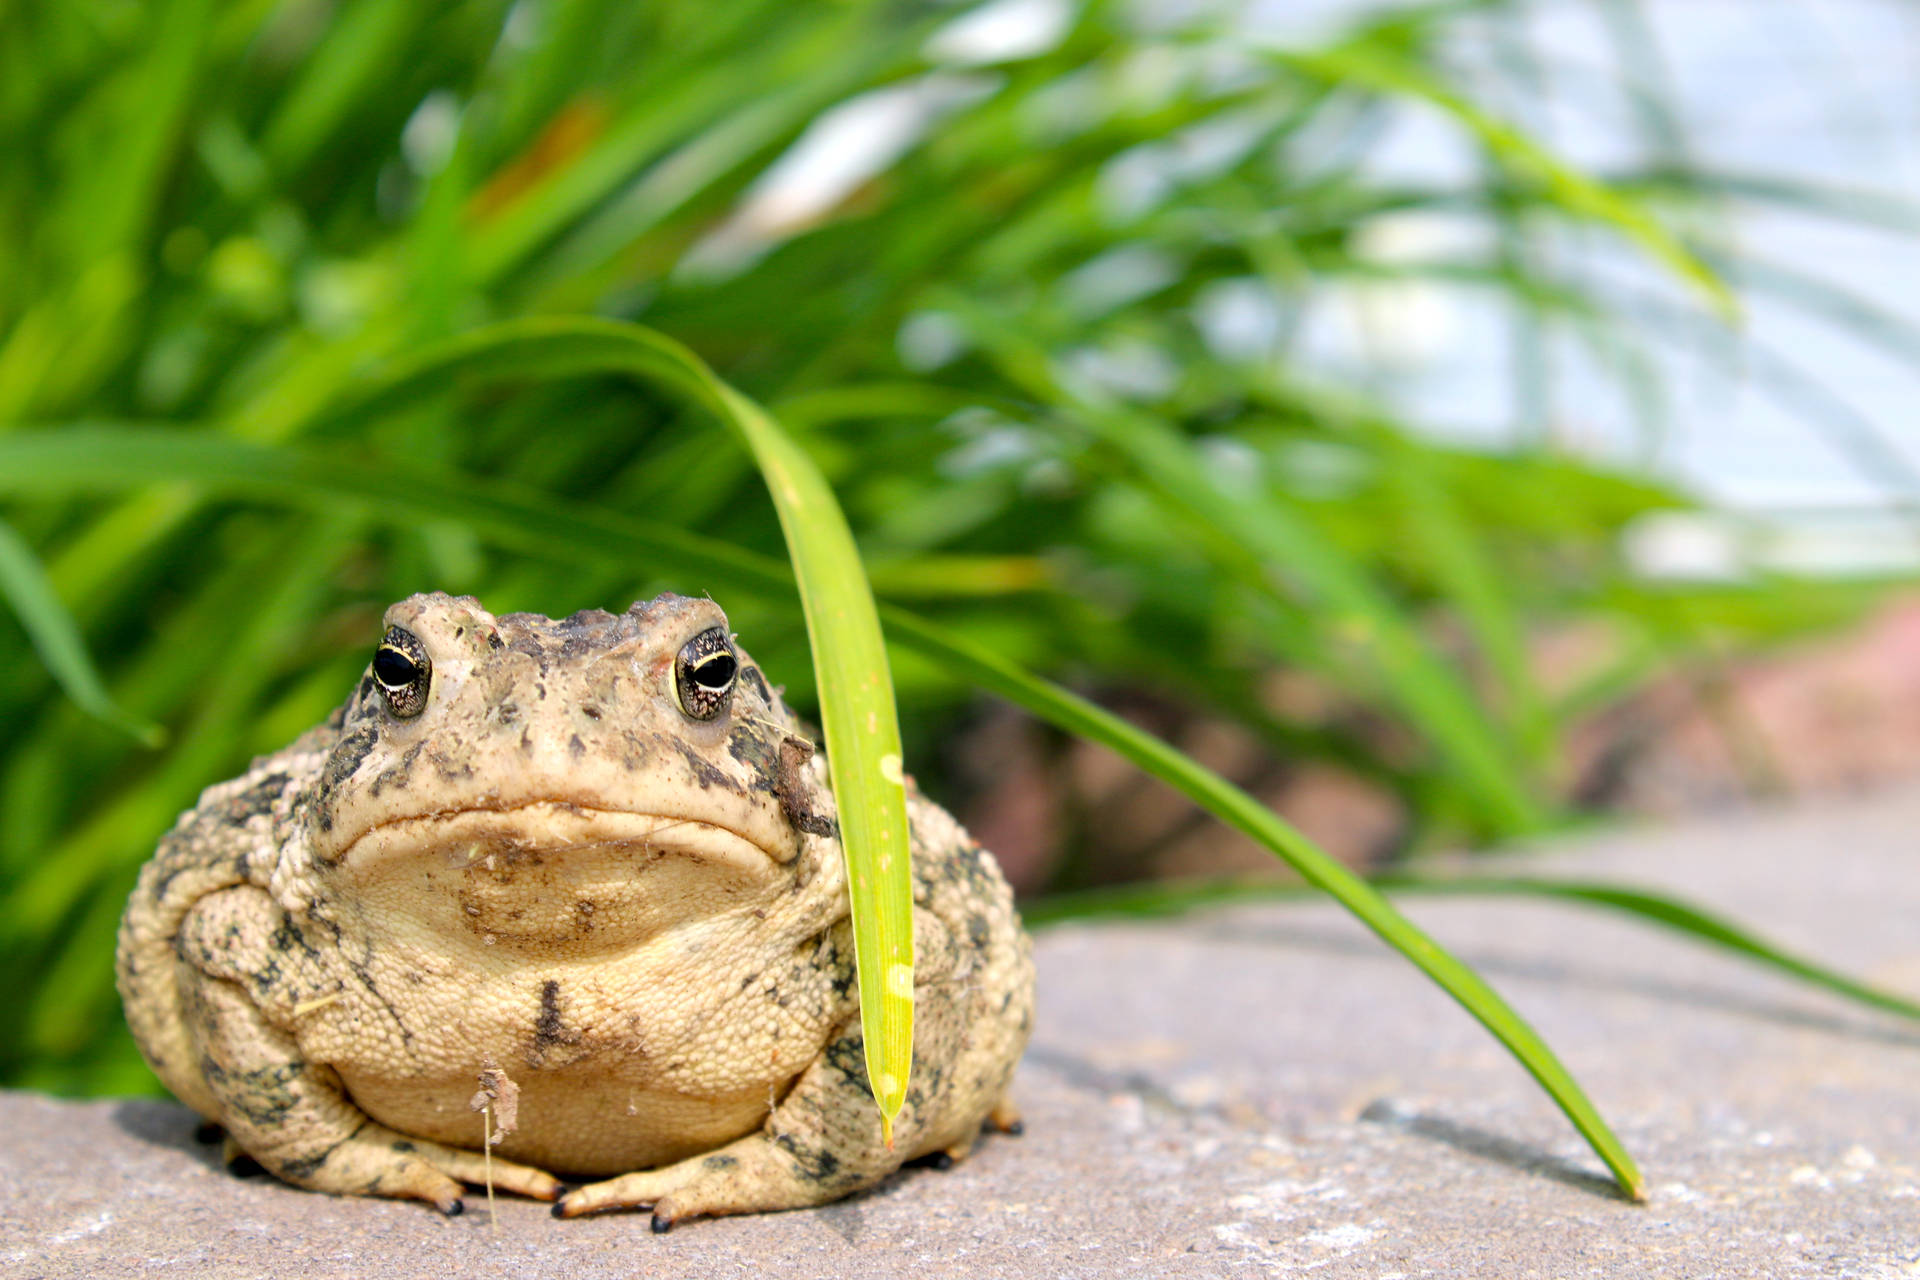 Frog 5472X3648 Wallpaper and Background Image